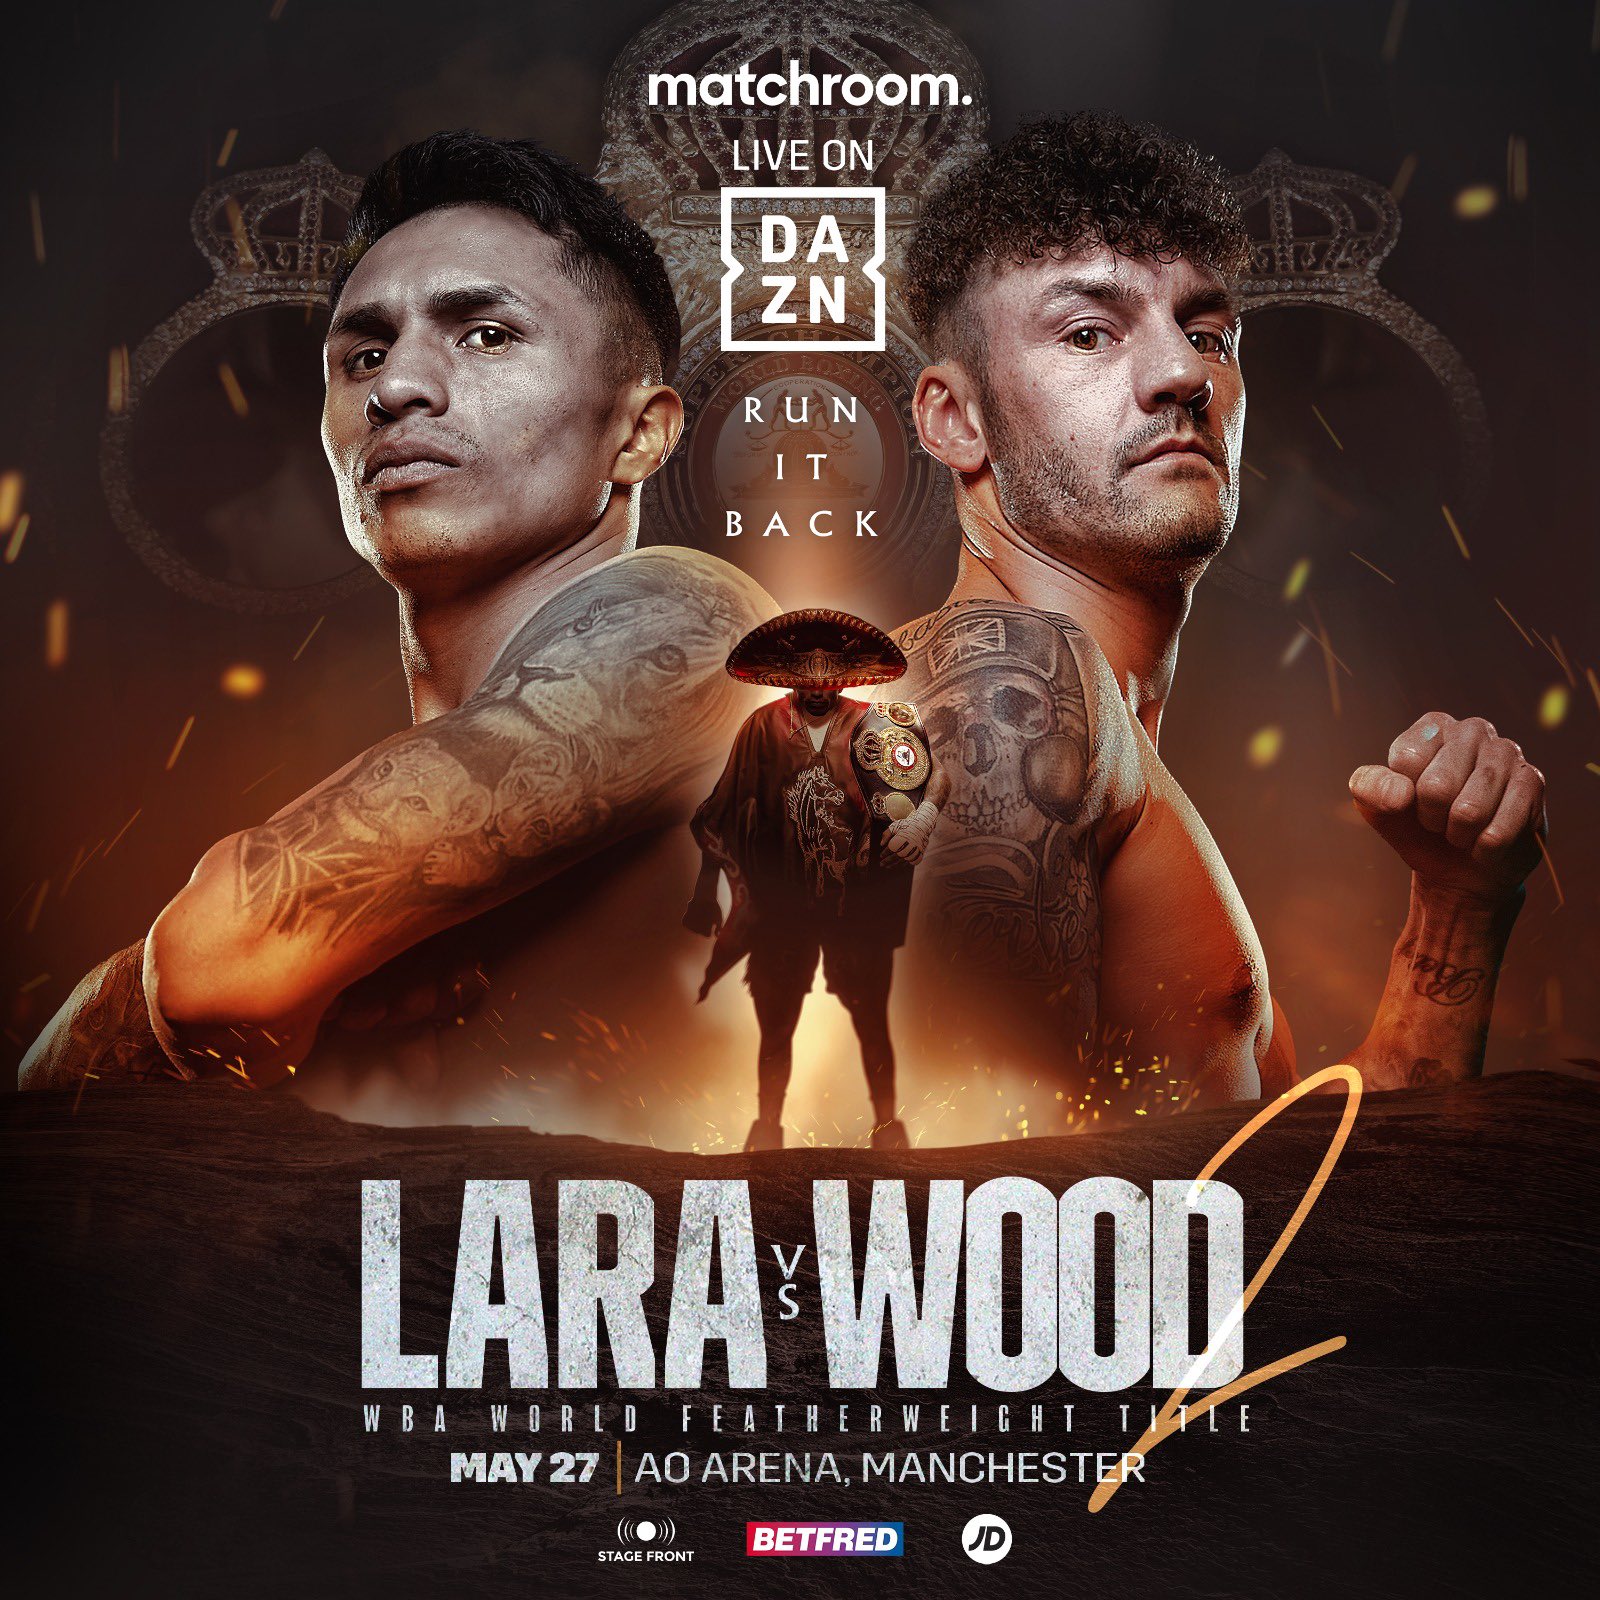 Lara Vs Wood 2 Announced for May 27 - Manchester 